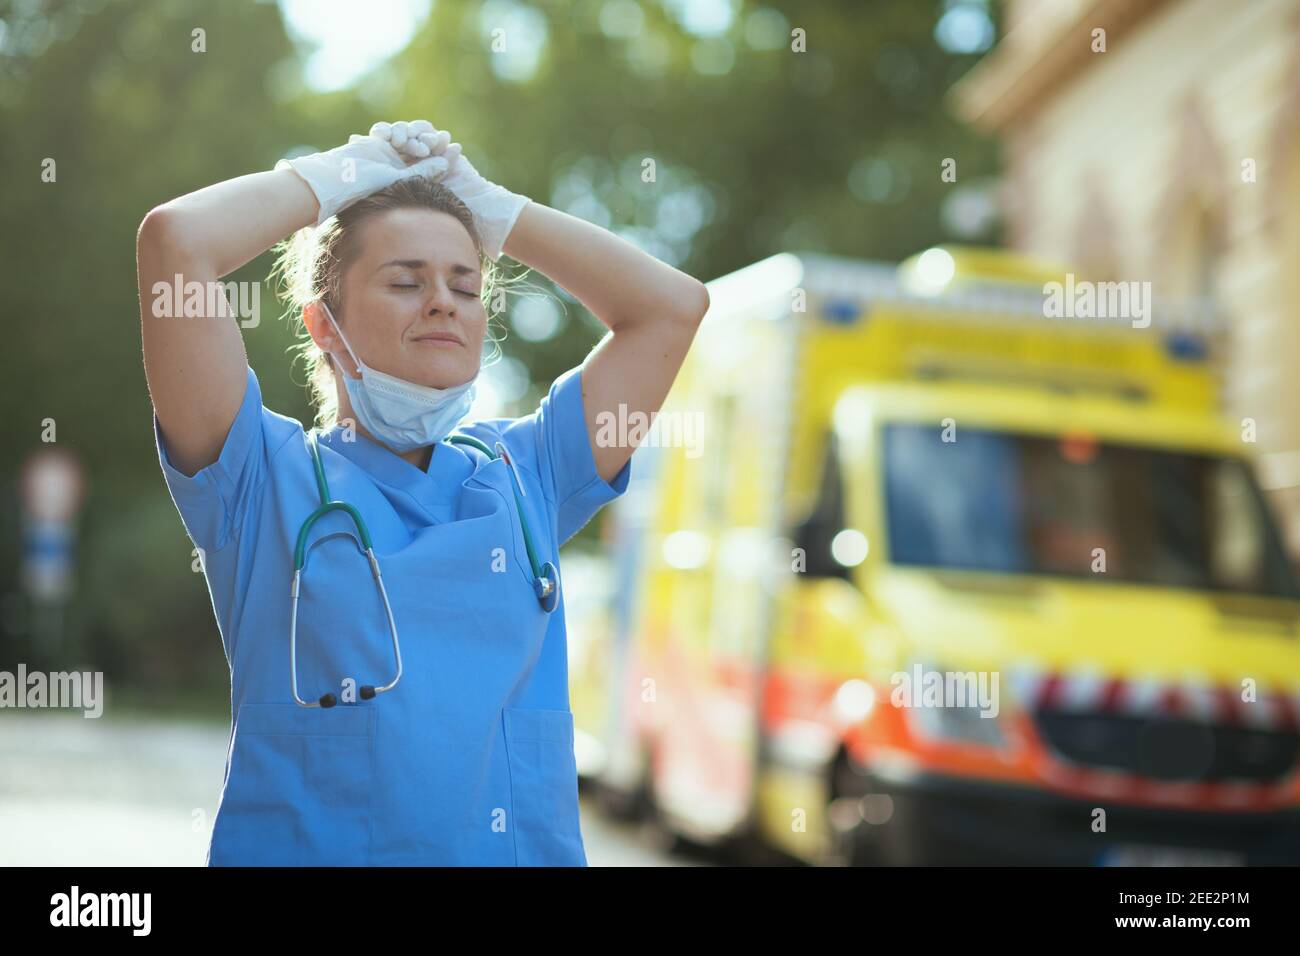 coronavirus pandemic. relaxed modern paramedic woman in uniform with stethoscope and medical mask breathing outdoors near ambulance. Stock Photo